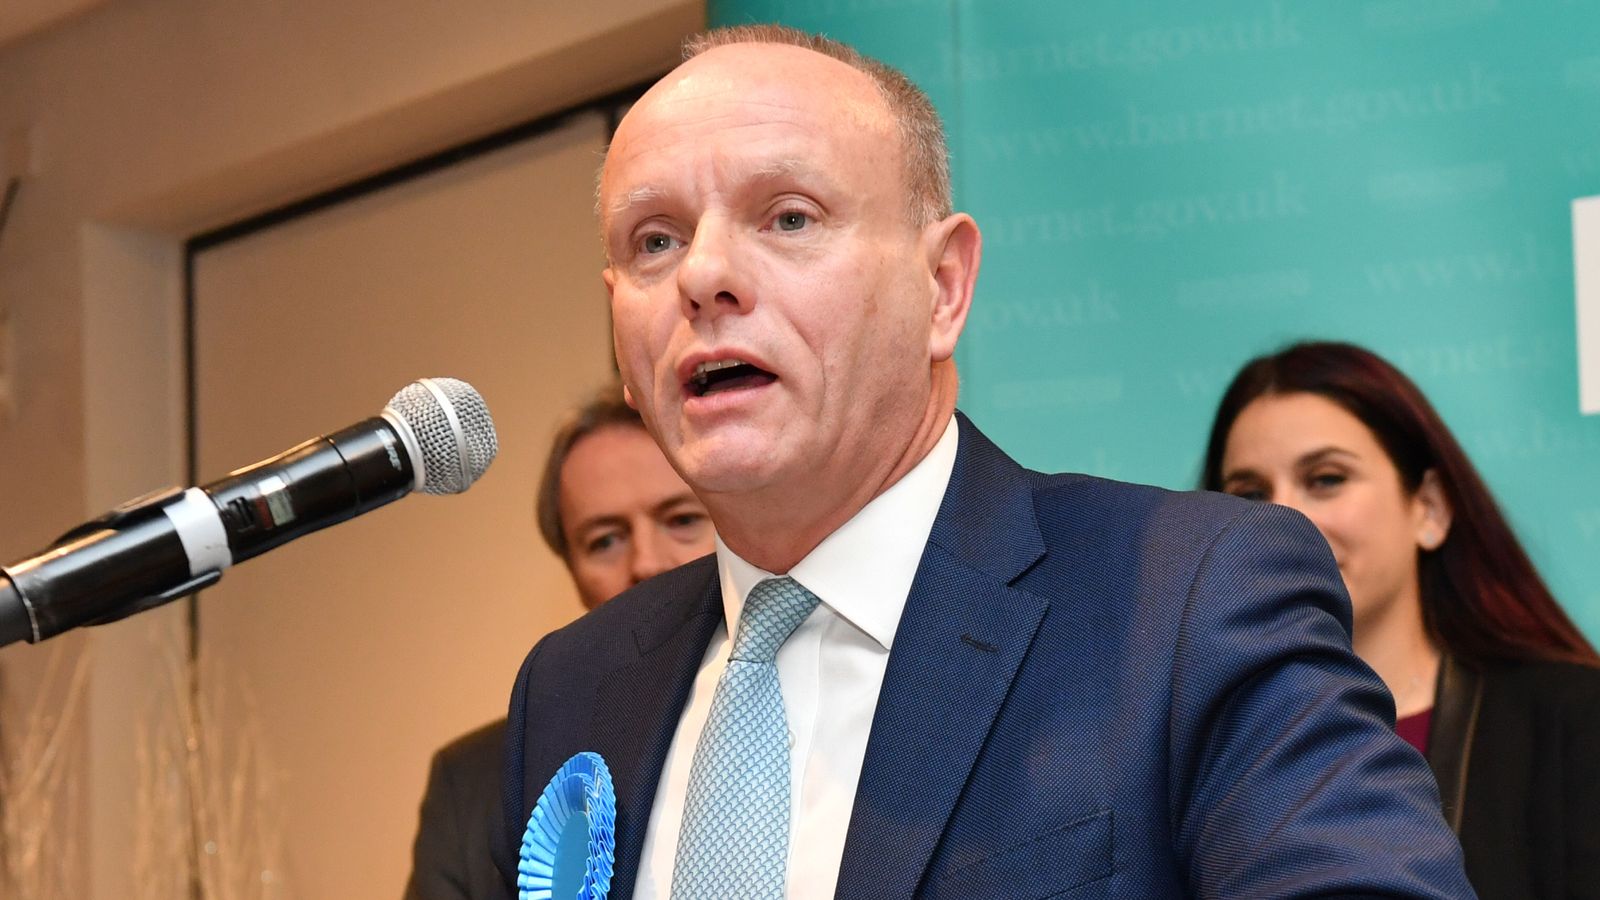 Mike Freer: Man arrested over alleged 'threatening' call to Tory MP